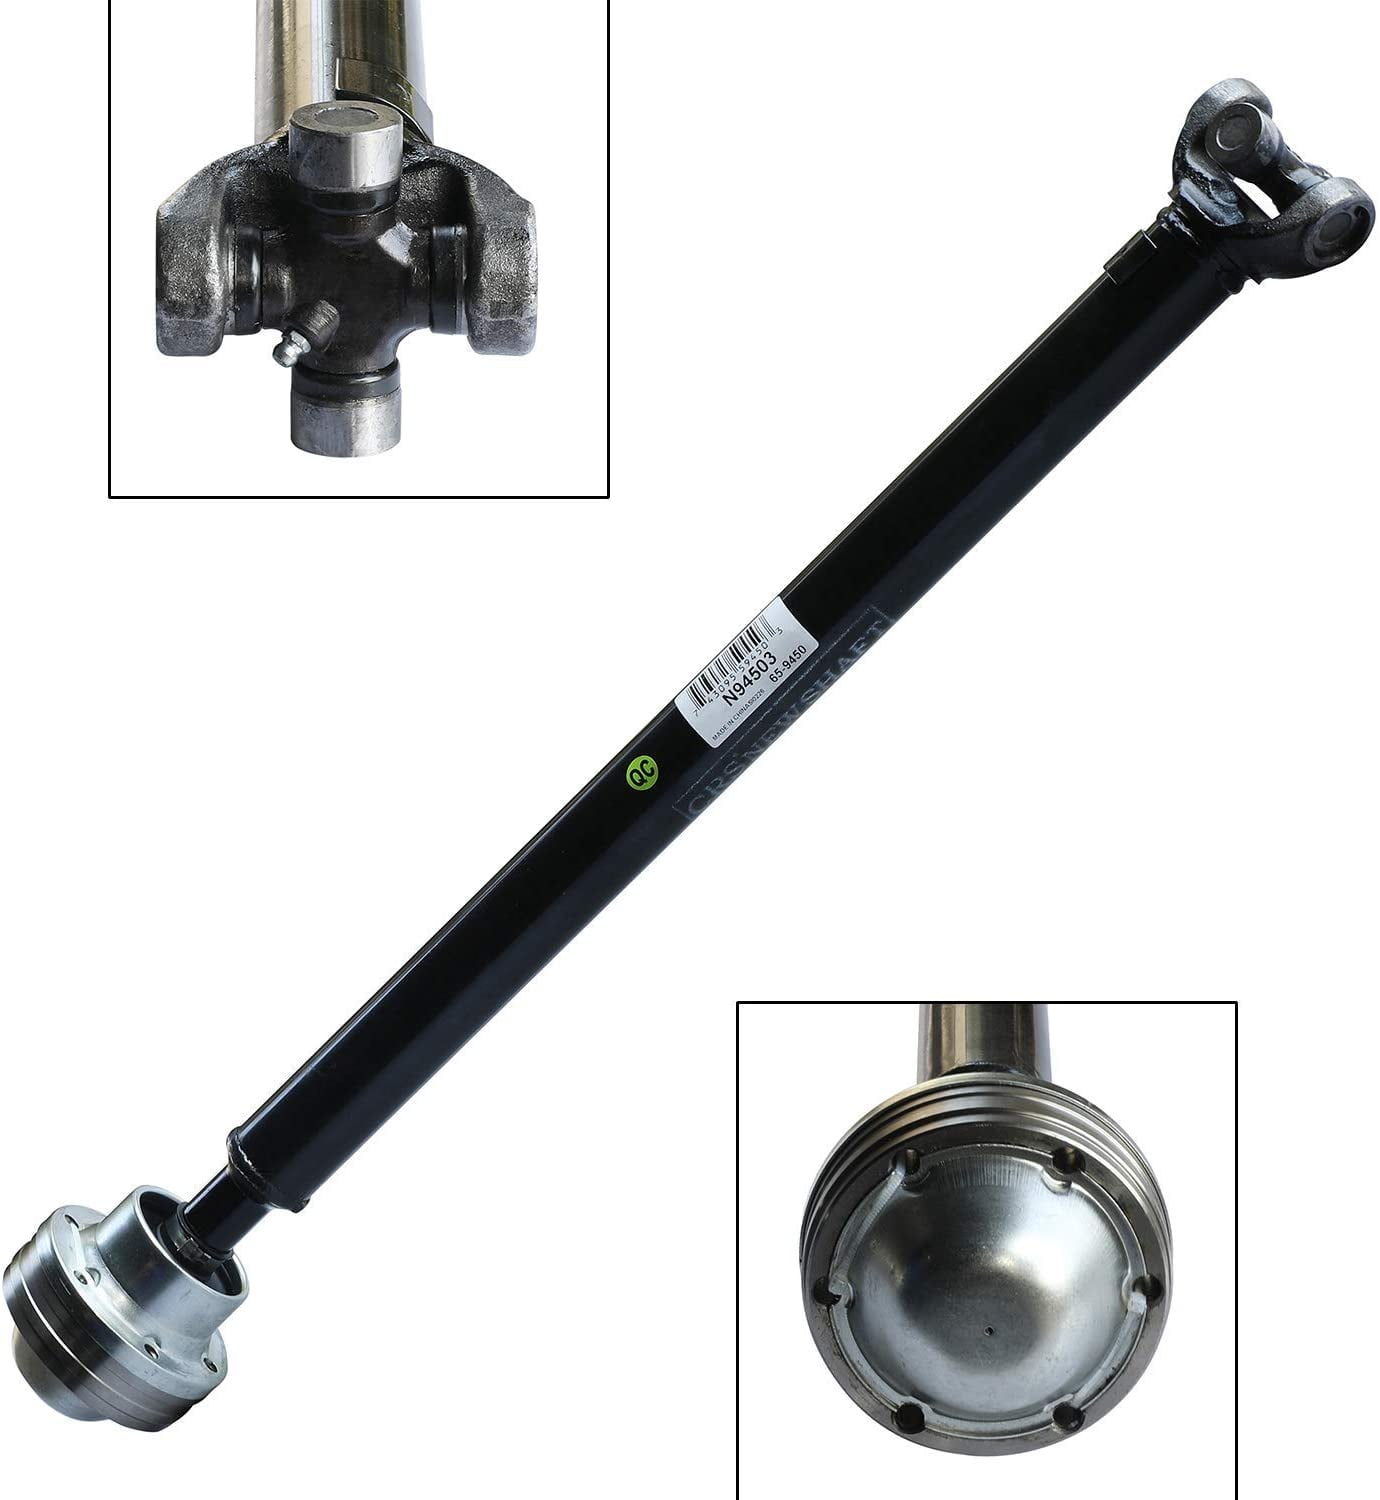 Front Driveshaft for Ford Explorer Mountaineer 5.0L Truck SUV Brand New